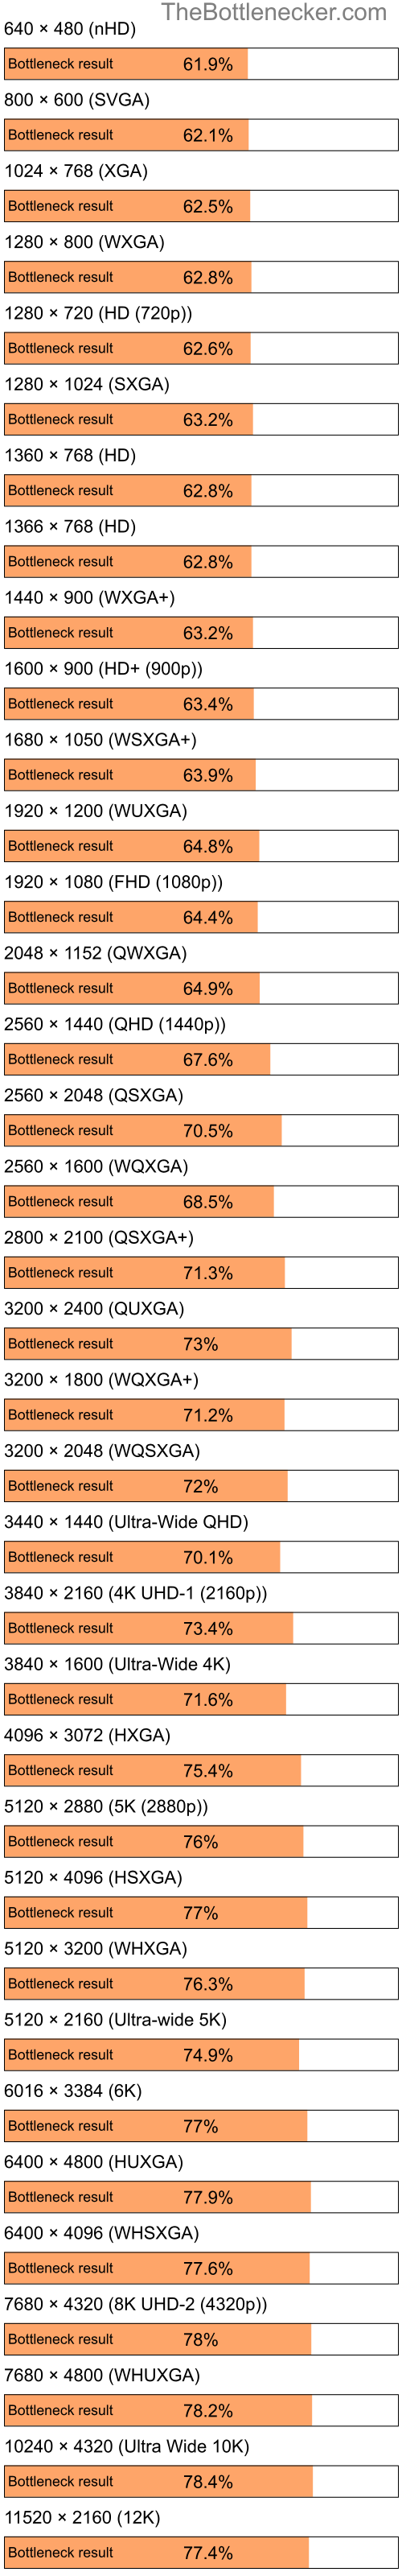 Bottleneck results by resolution for Intel Celeron M 420 and AMD M880G with Mobility Radeon HD 4250 in General Tasks